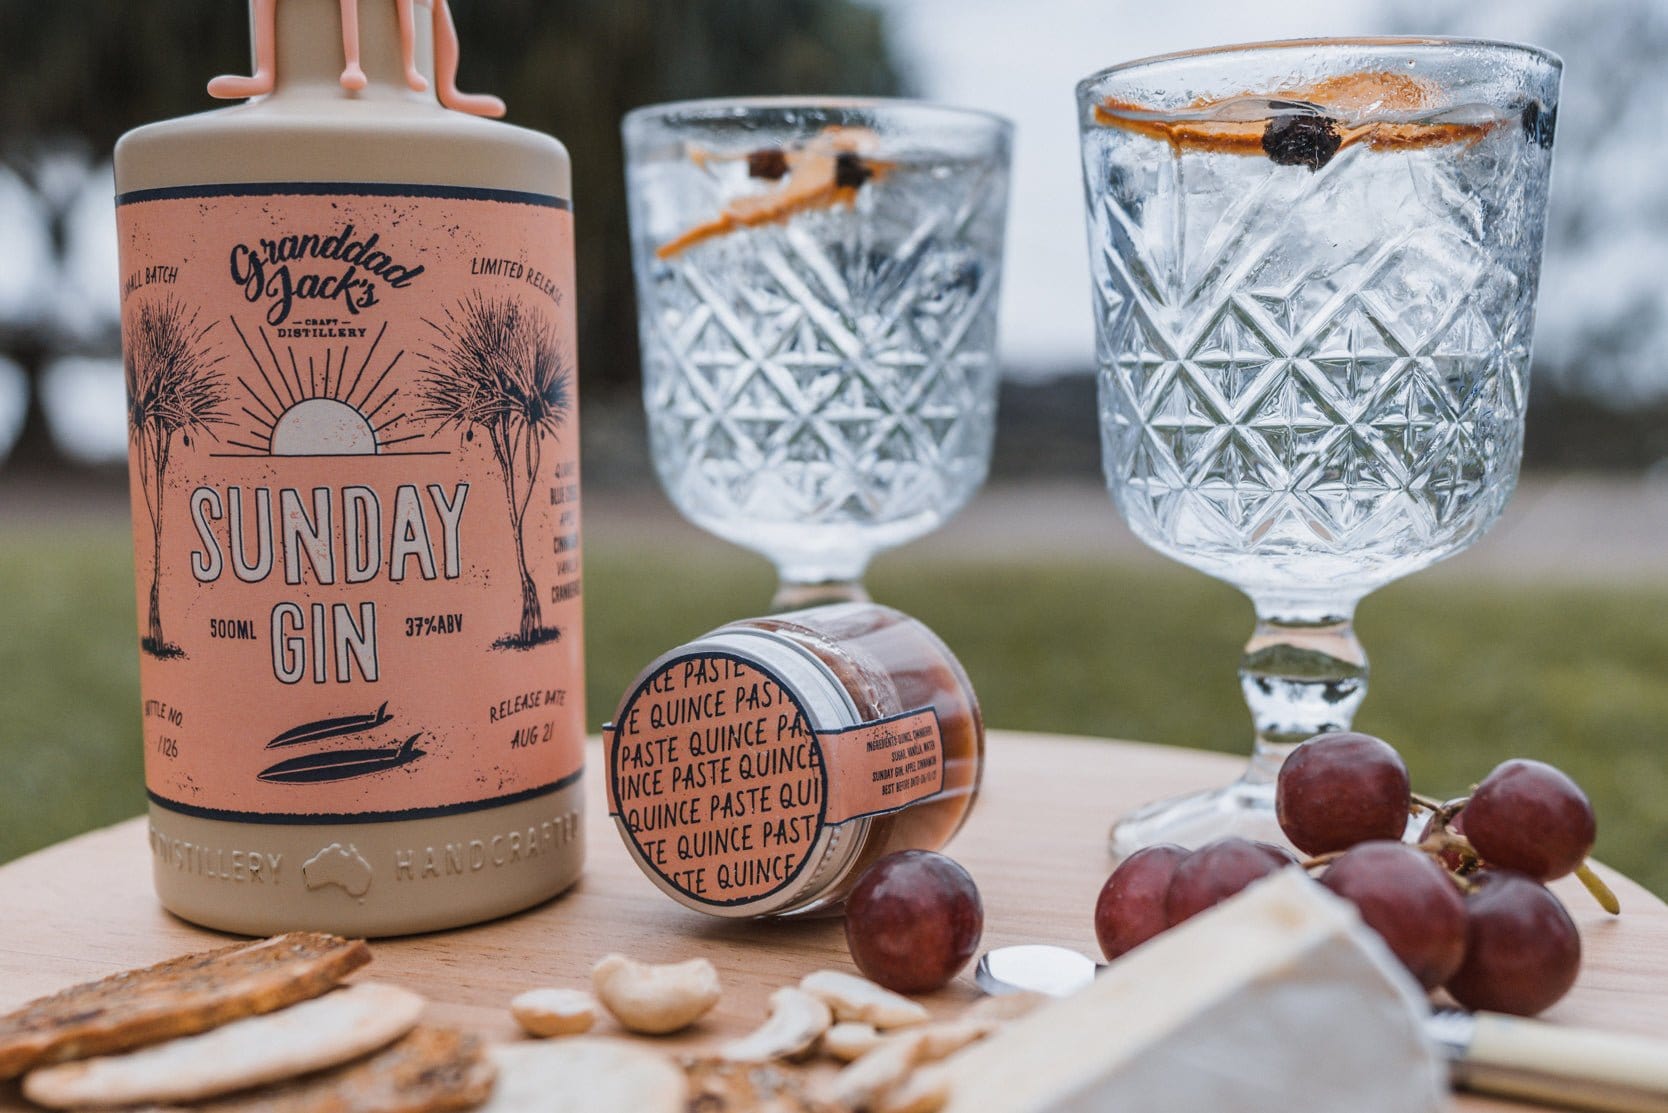 Granddad Jack's Craft Distillery 500ml Bottle & Quince Paste Sunday Gin & Quince Paste